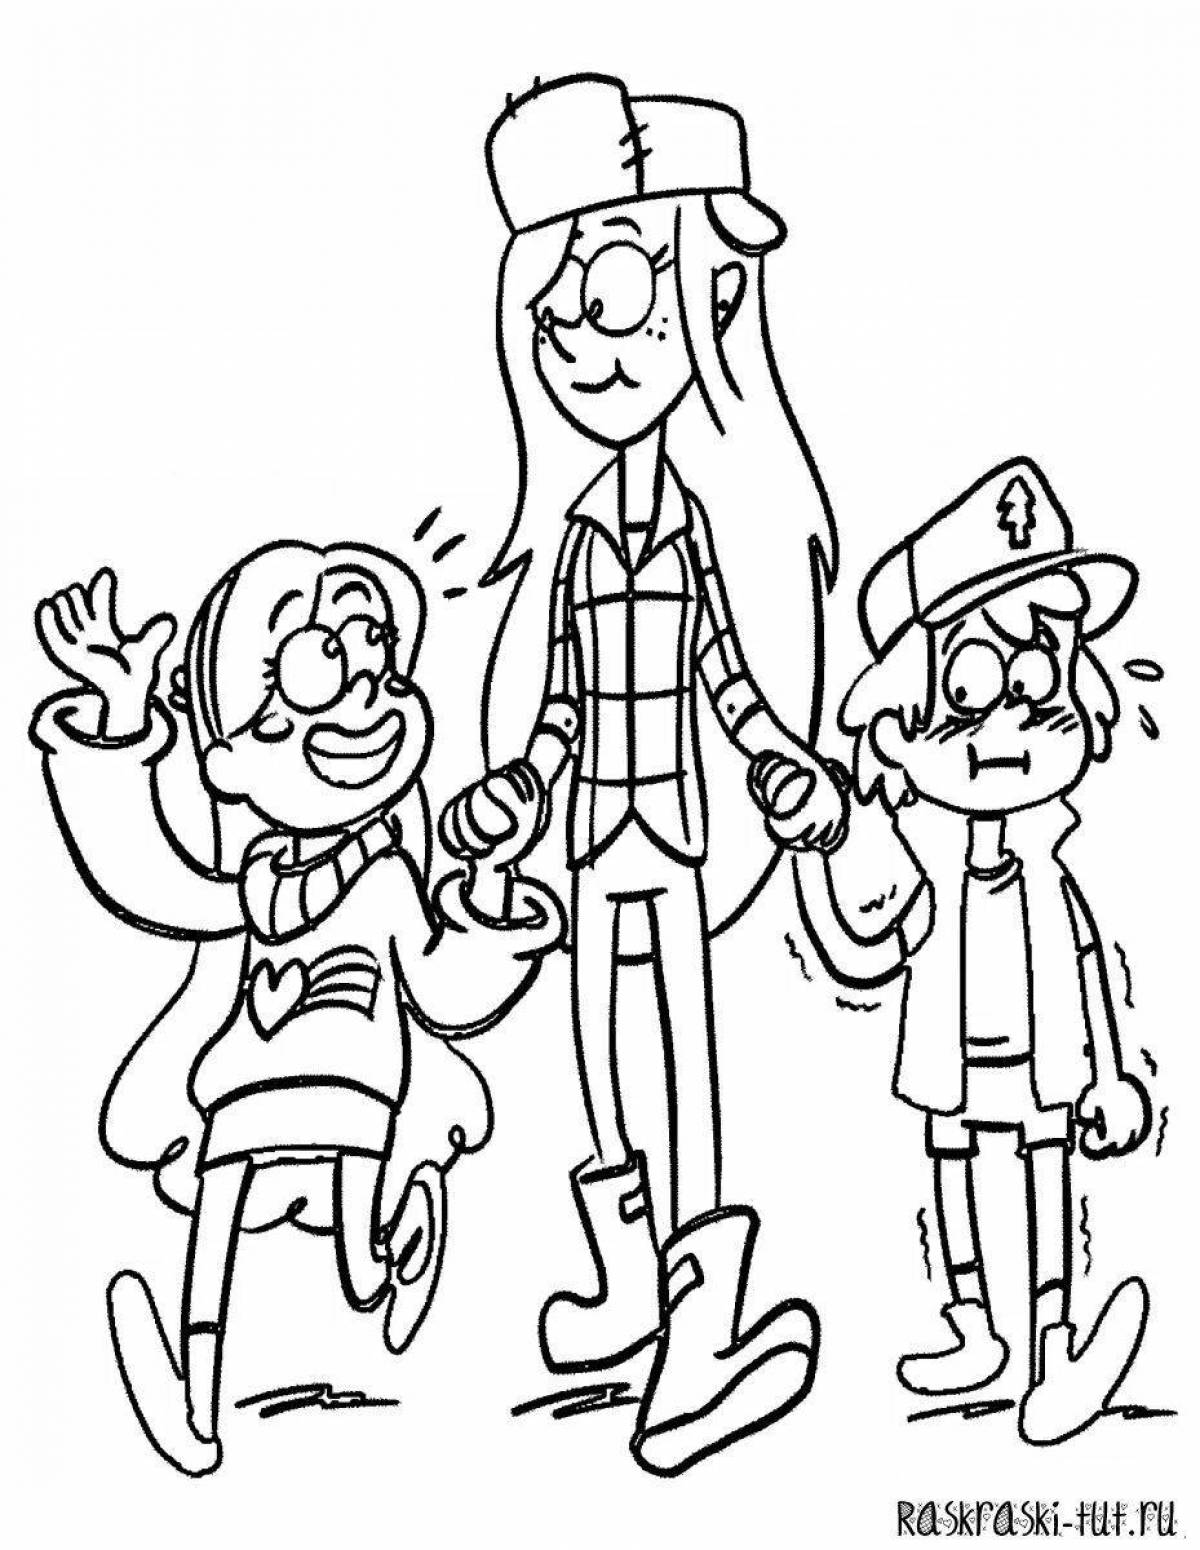 Wendy's Gravity Falls Animated Coloring Page